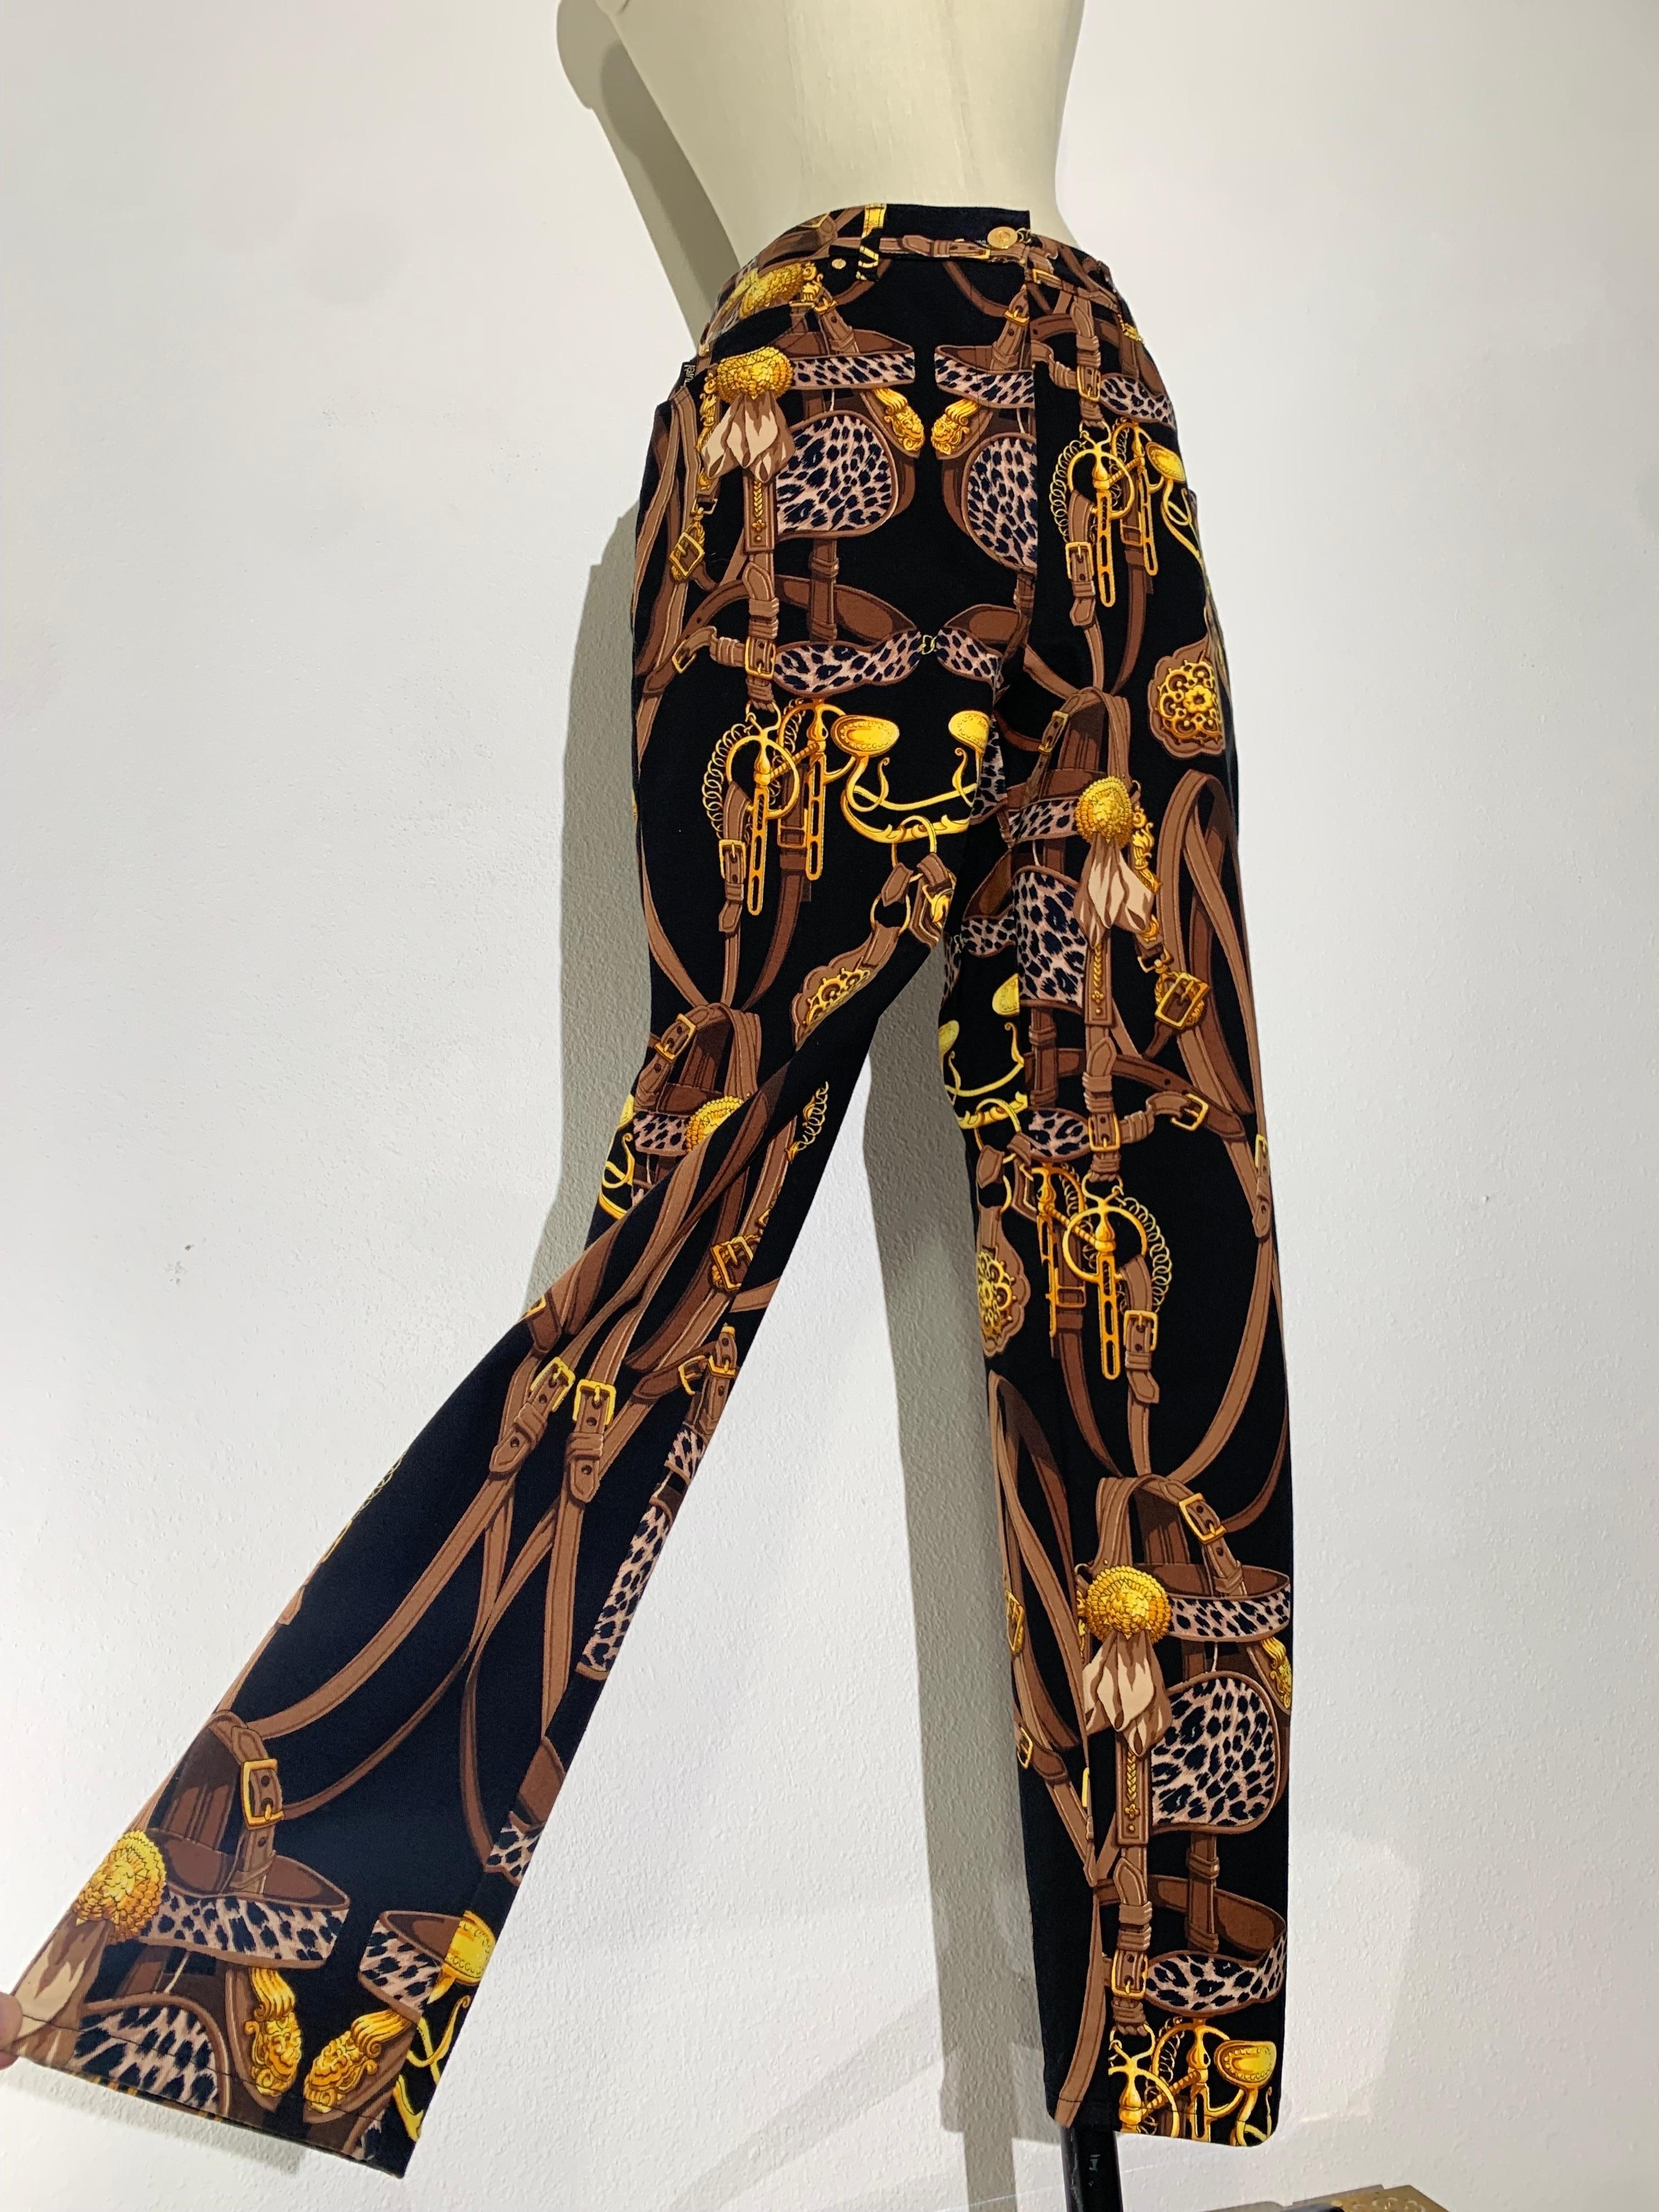 1980s Laurel Western-Inspired Print Black Denim Pants Jeans: New, never worn. Tapered leg with high waist and full cut plus a bit of stretch for curvy girls. Four pockets with gold grommets and button. Fits US size 8-10.